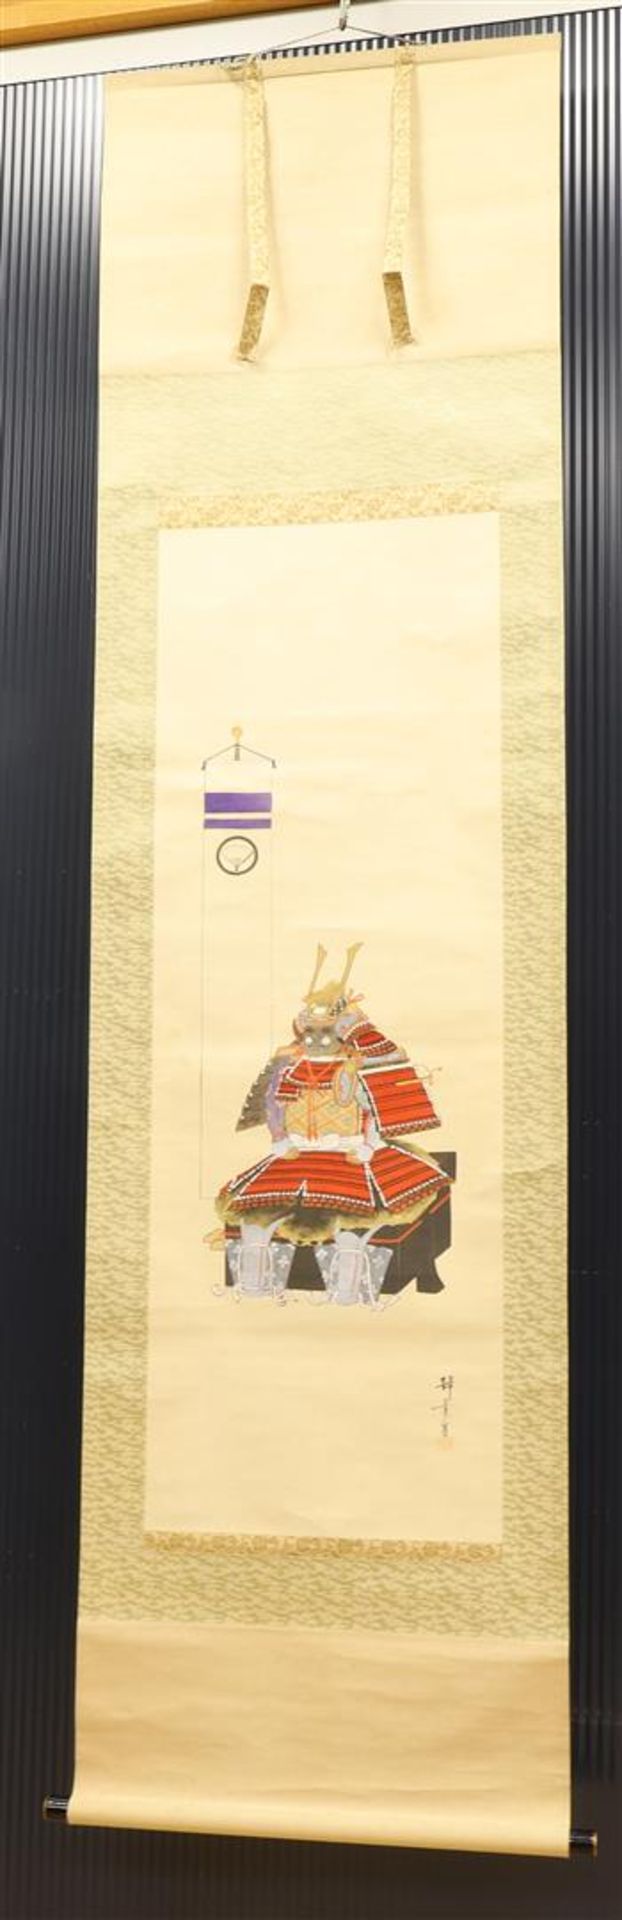 A scroll depicting samurai with flag, Japan, 20th century.